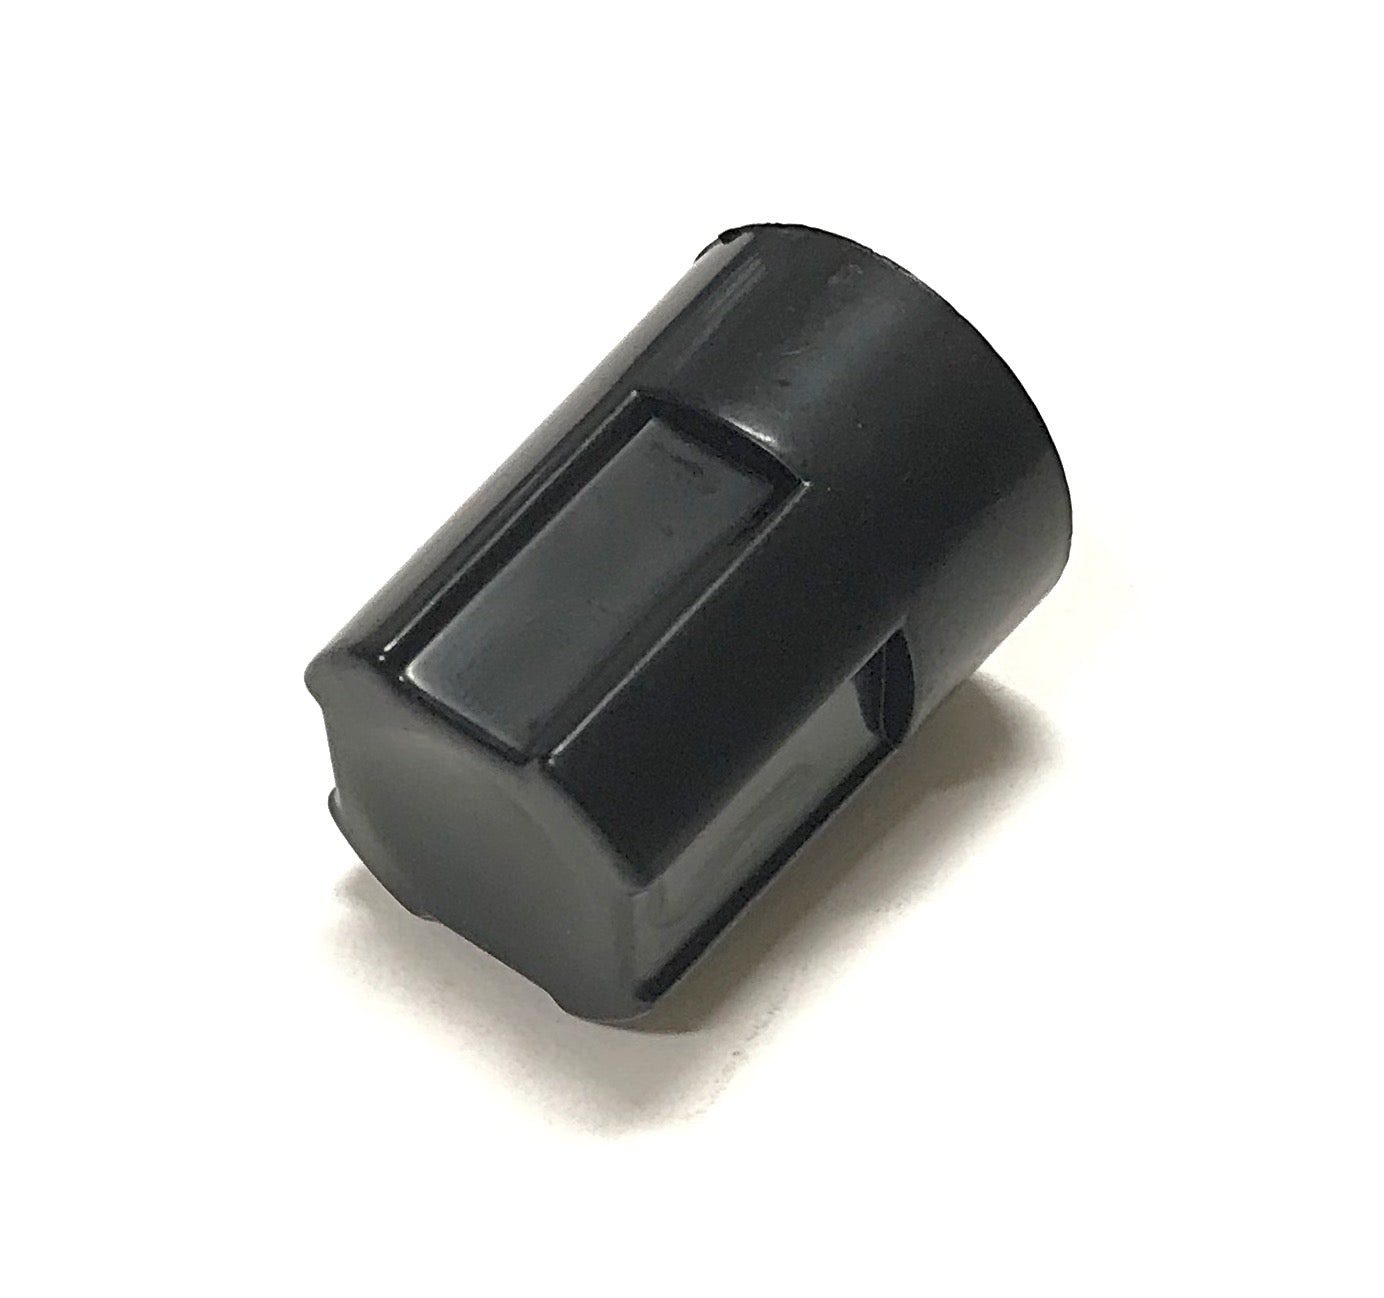 OEM Danby Air Conditioner AC Drain Connector Cover Originally Shipped With DPA140HB1BDB-6, DPA140HBACBDB